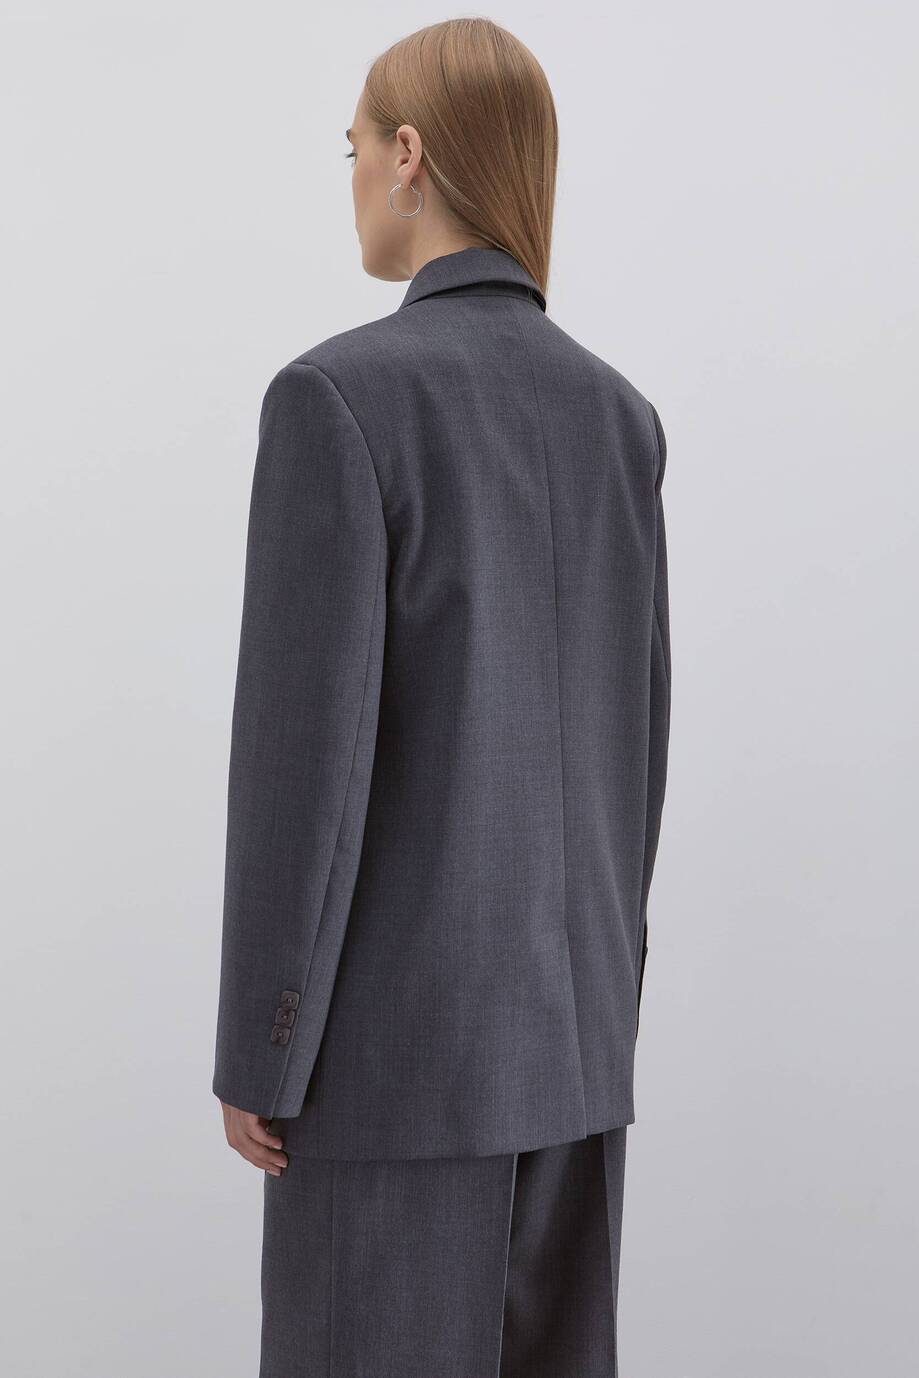 Double-breasted jacket with a straight silhouette